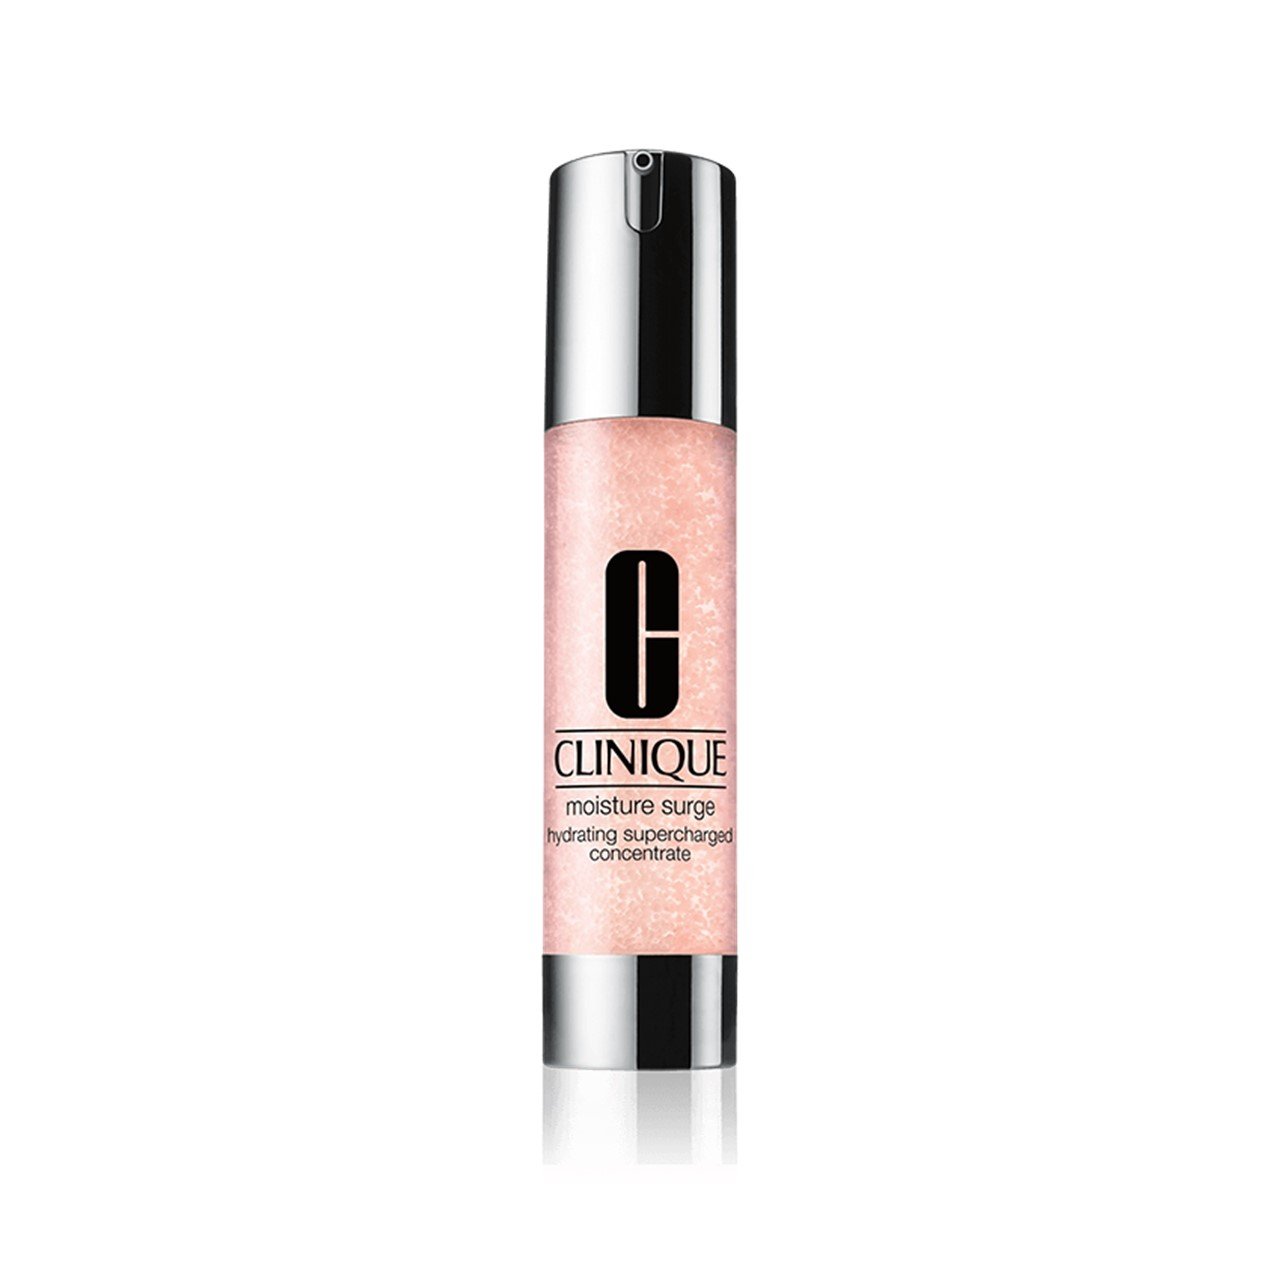 Clinique Moisture Surge Hydrating Supercharged Concentrate 48ml (1.62fl oz)